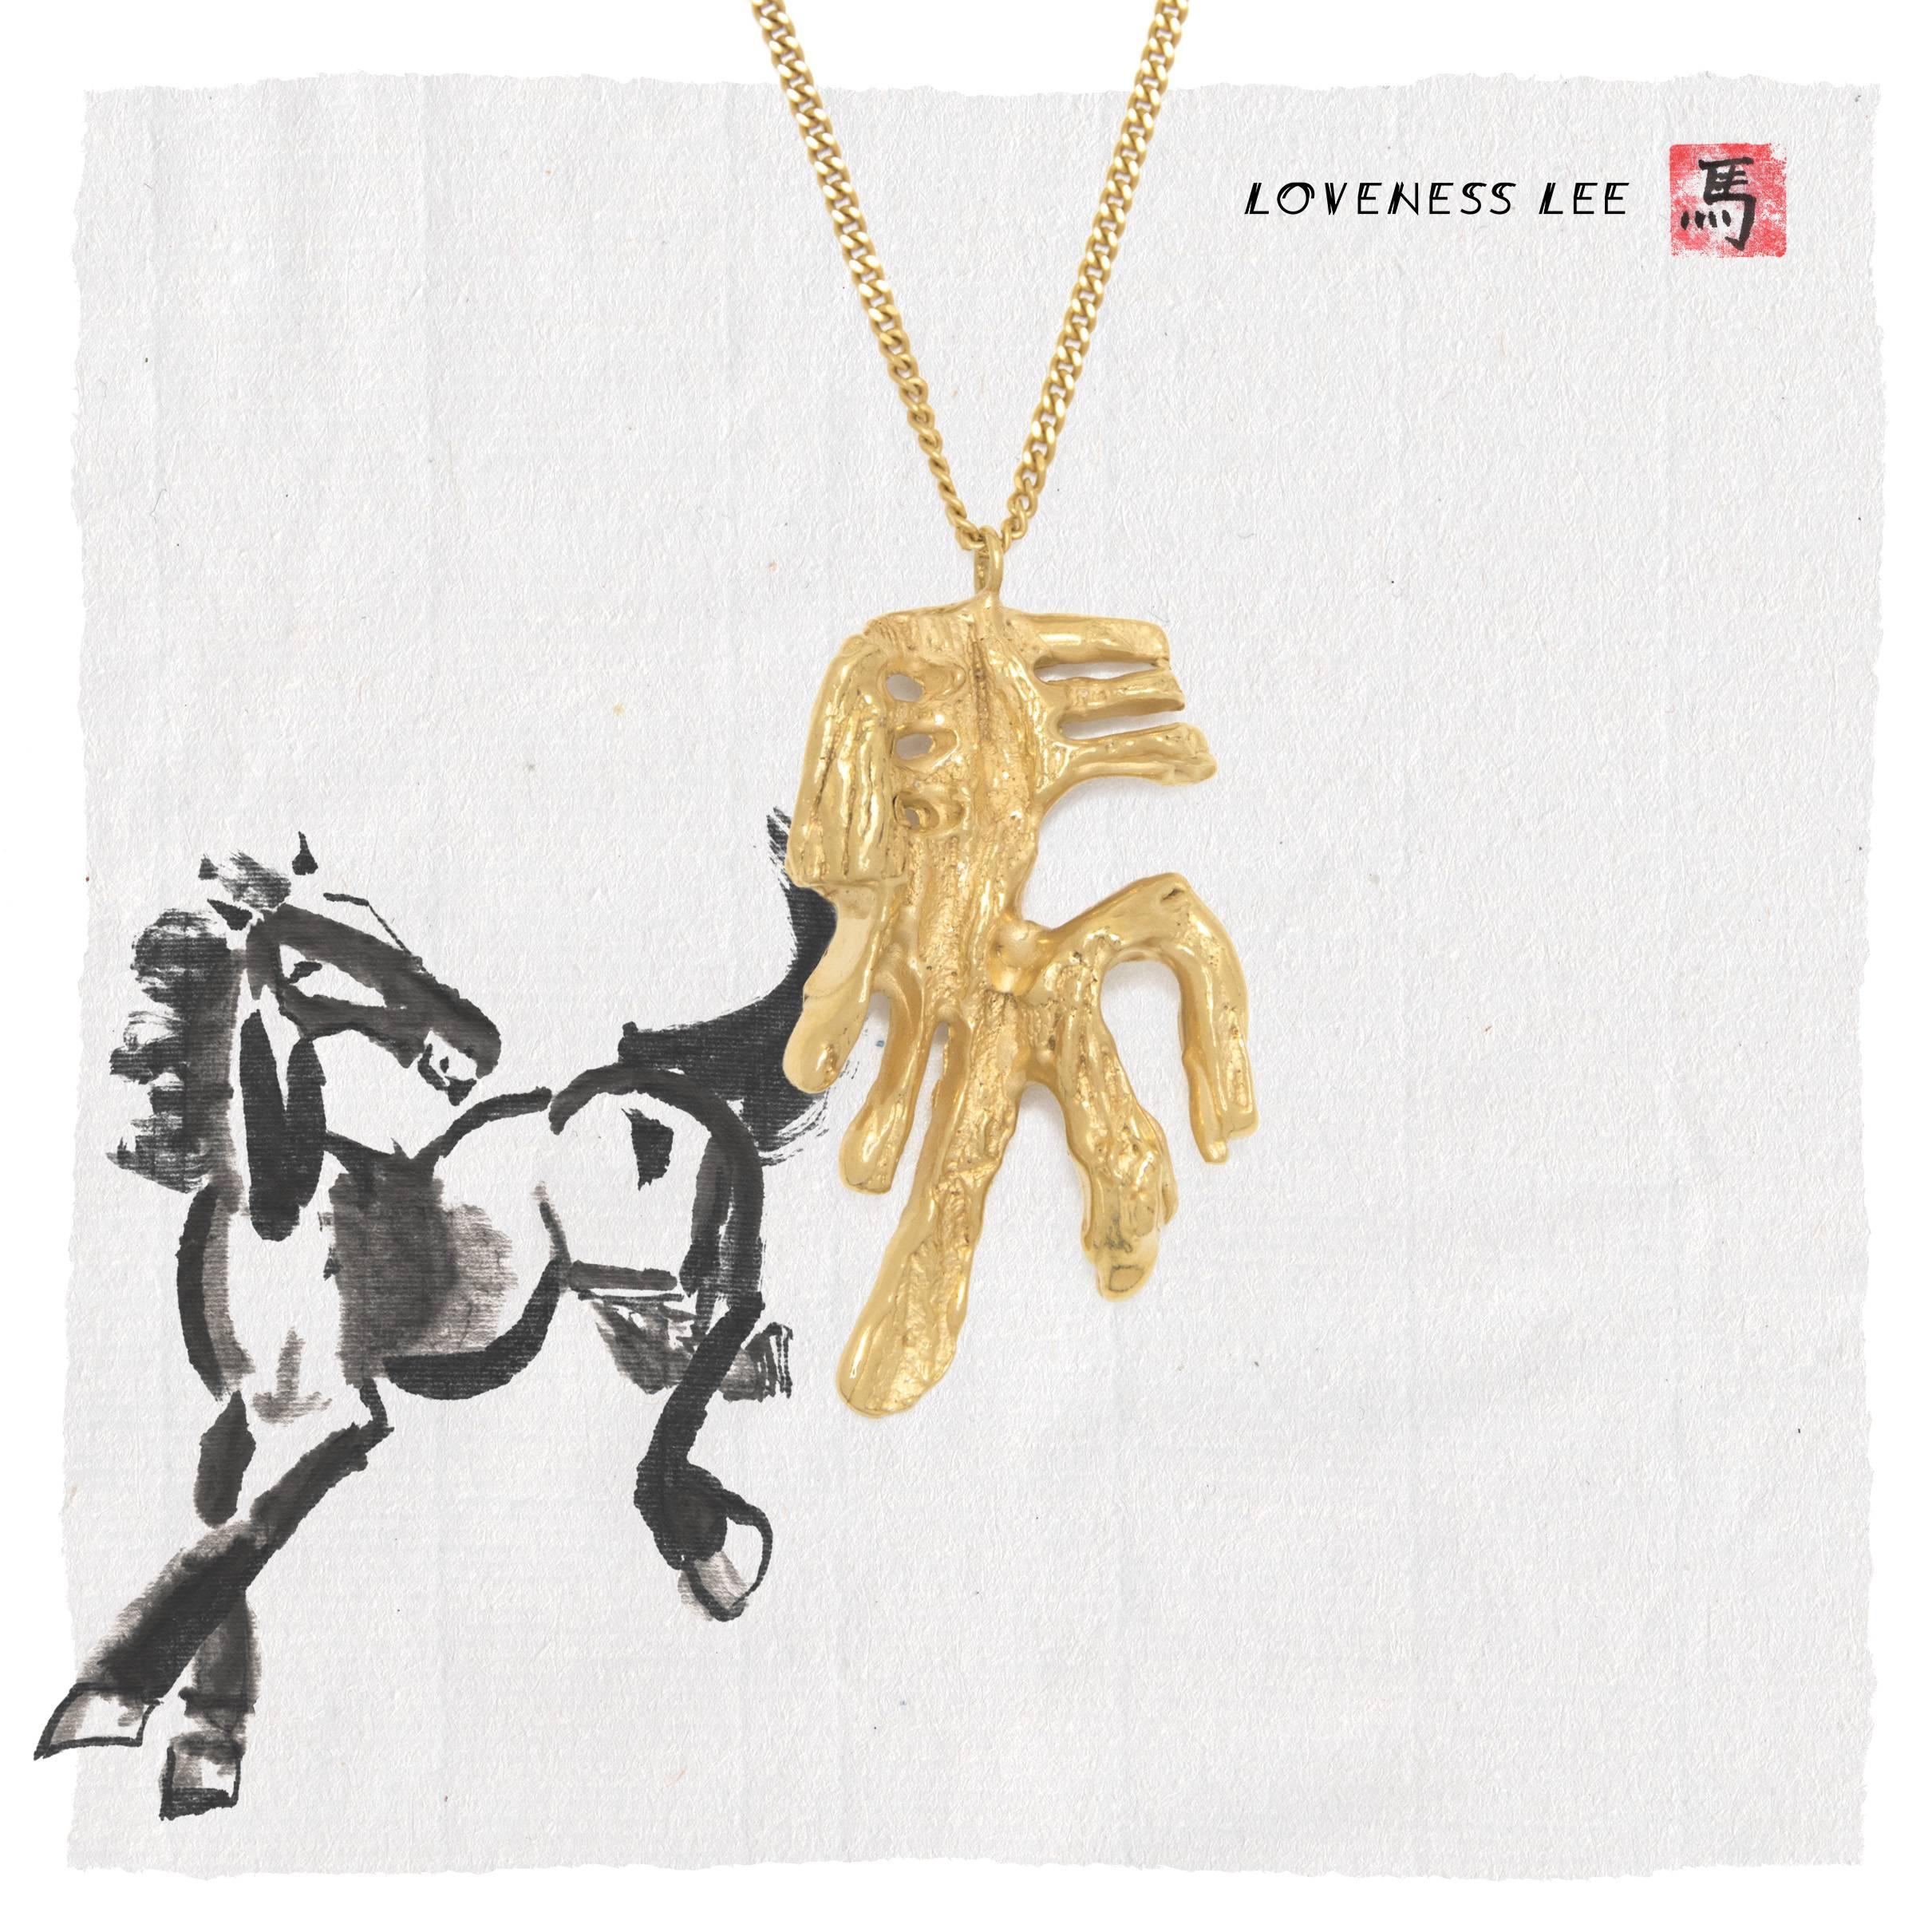 Loveness Lee - Chinese Zodiac Horse - Horoscope Gold Pendant Necklace In New Condition For Sale In London, GB